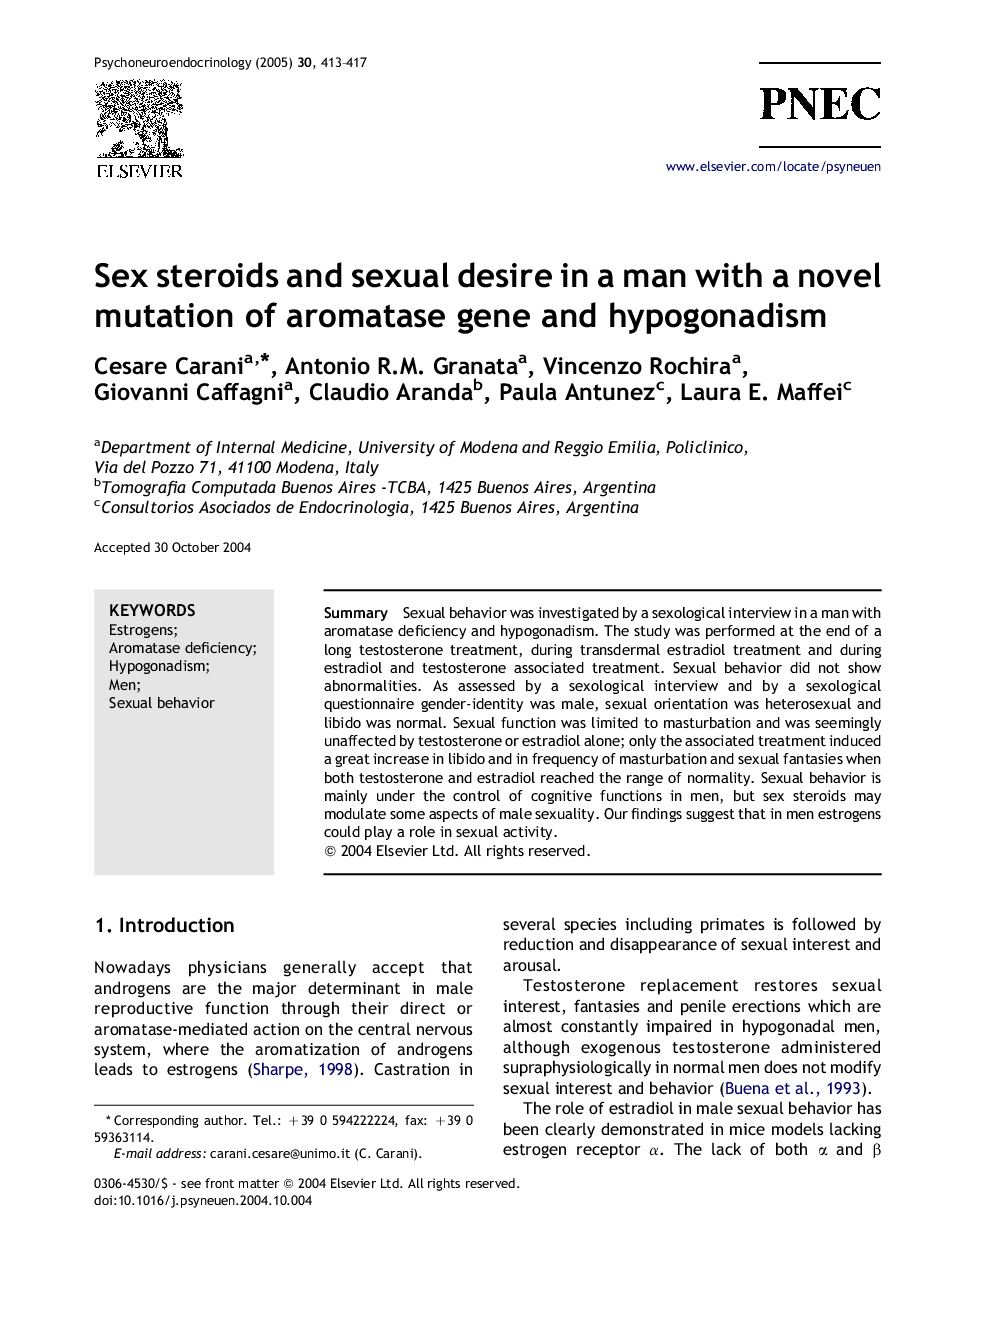 Sex steroids and sexual desire in a man with a novel mutation of aromatase gene and hypogonadism